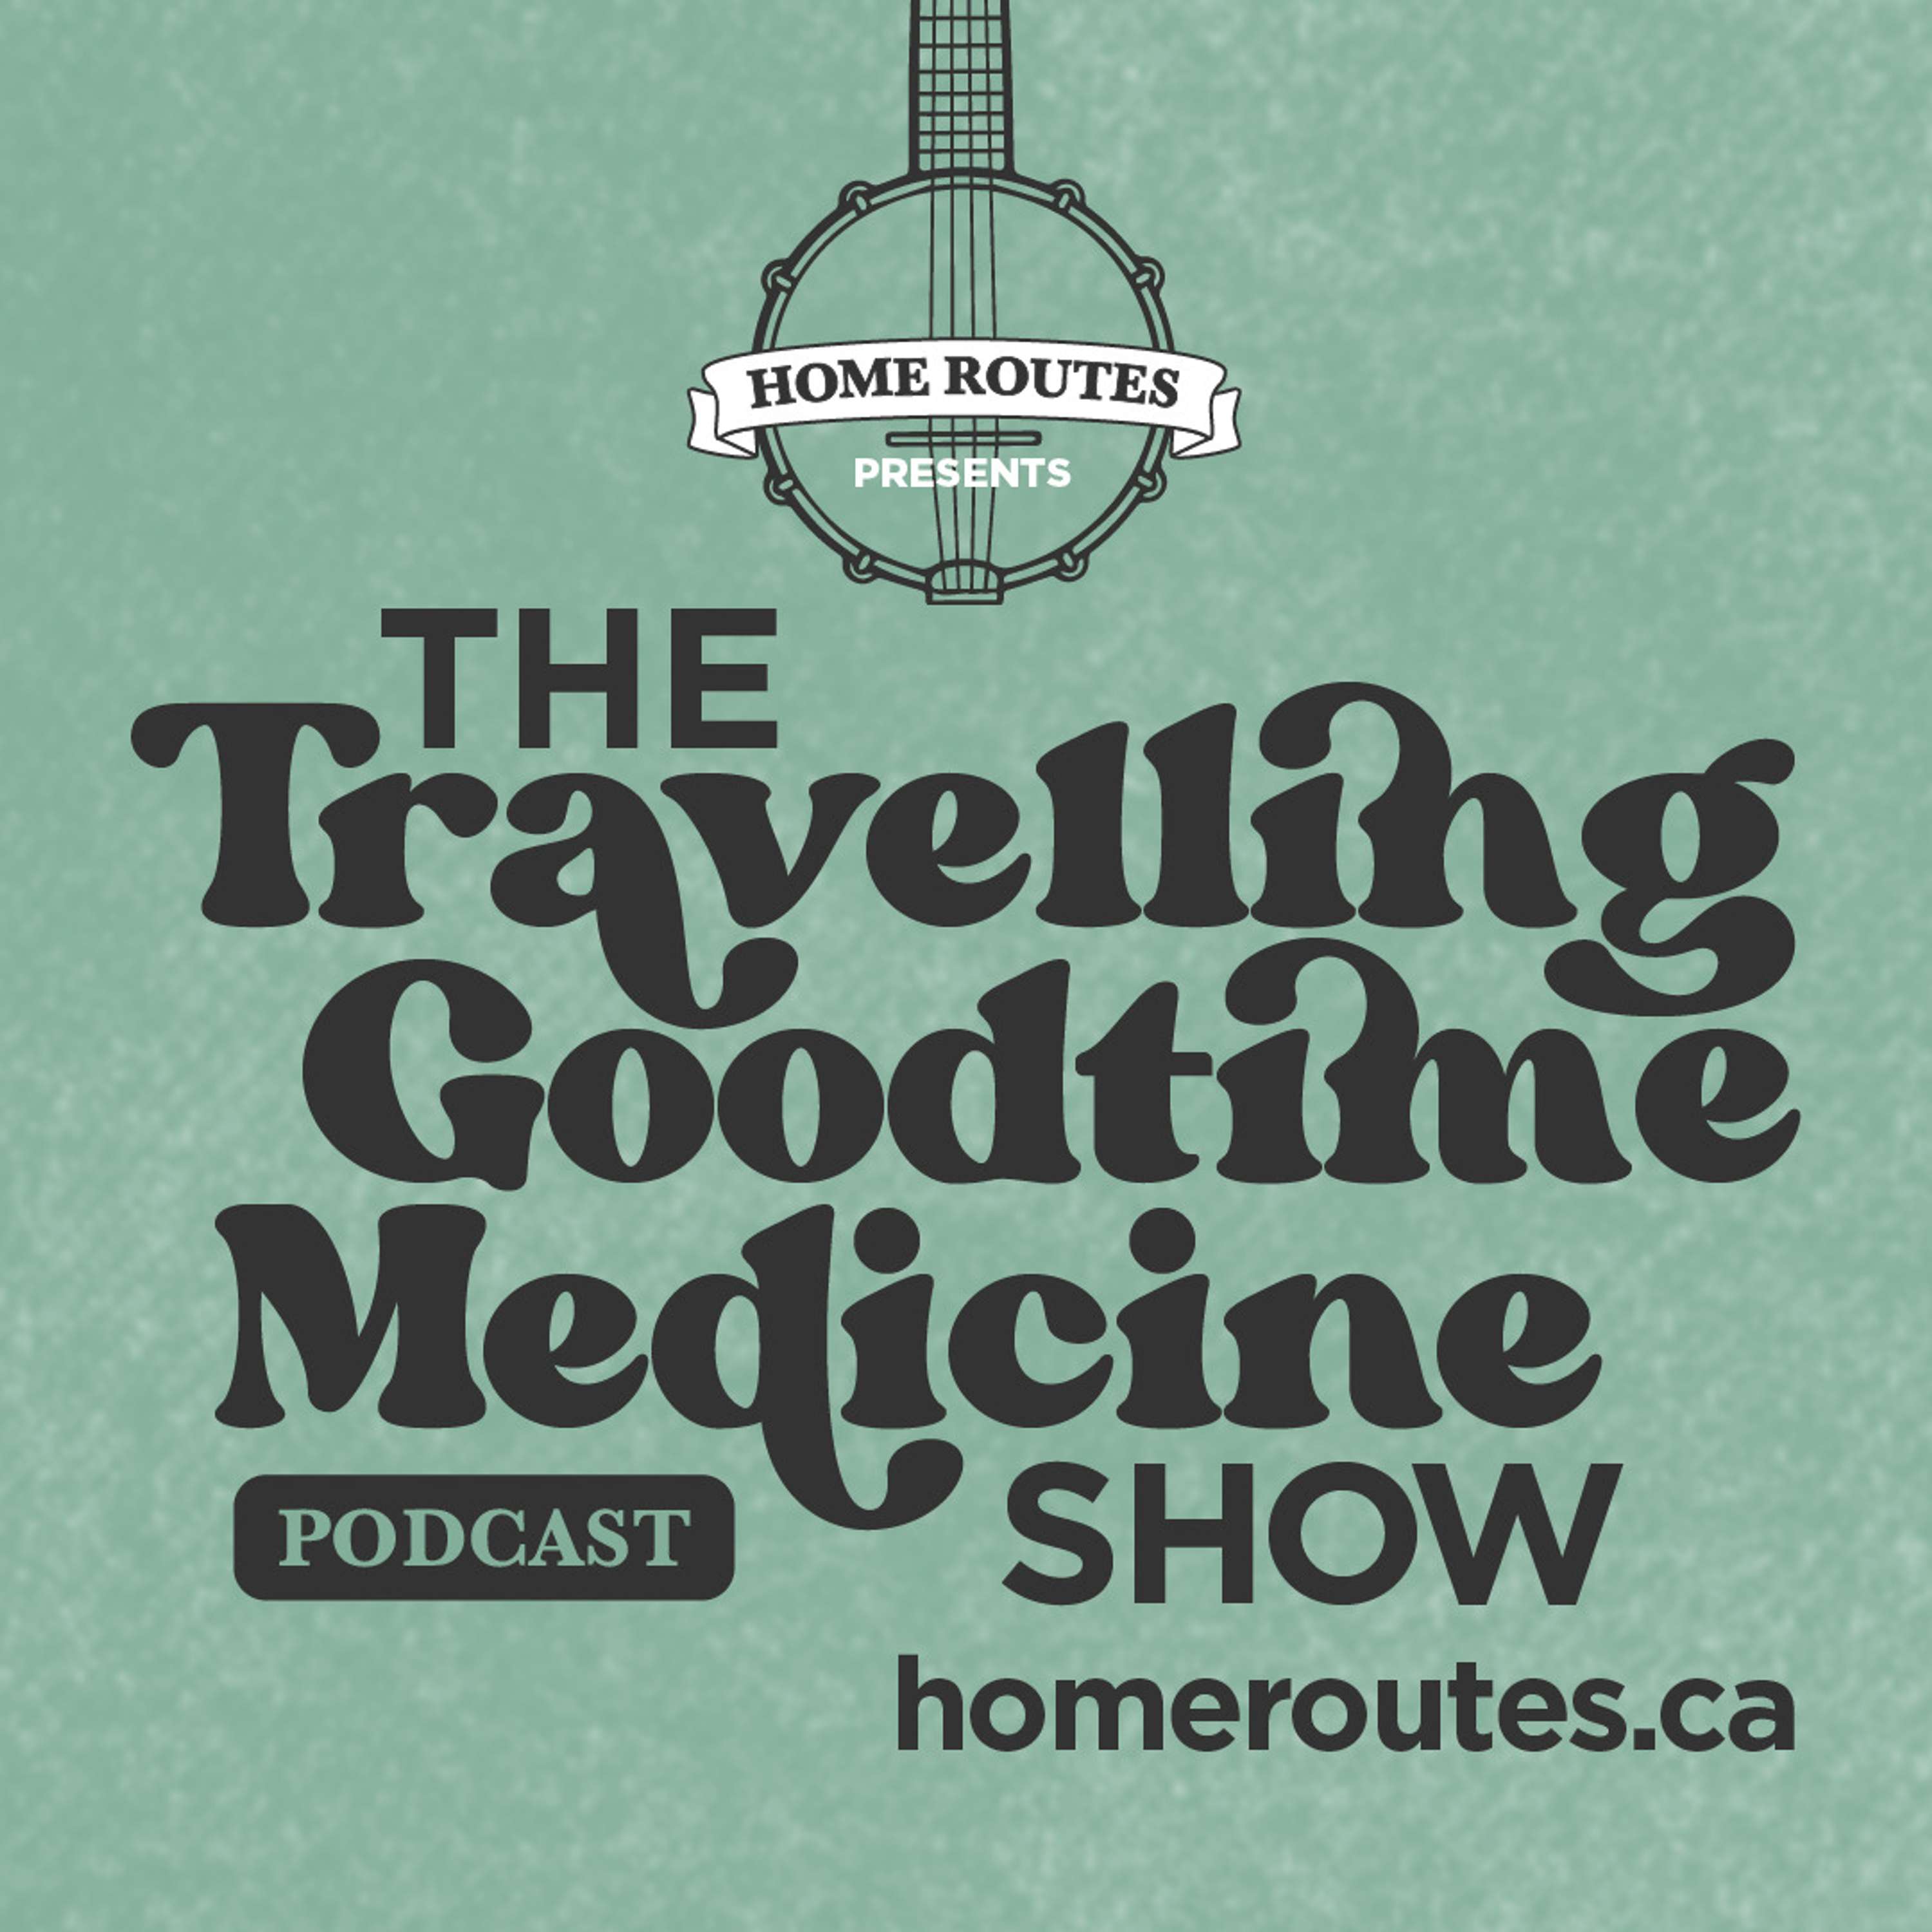 The Travelling Goodtime Medicine Show